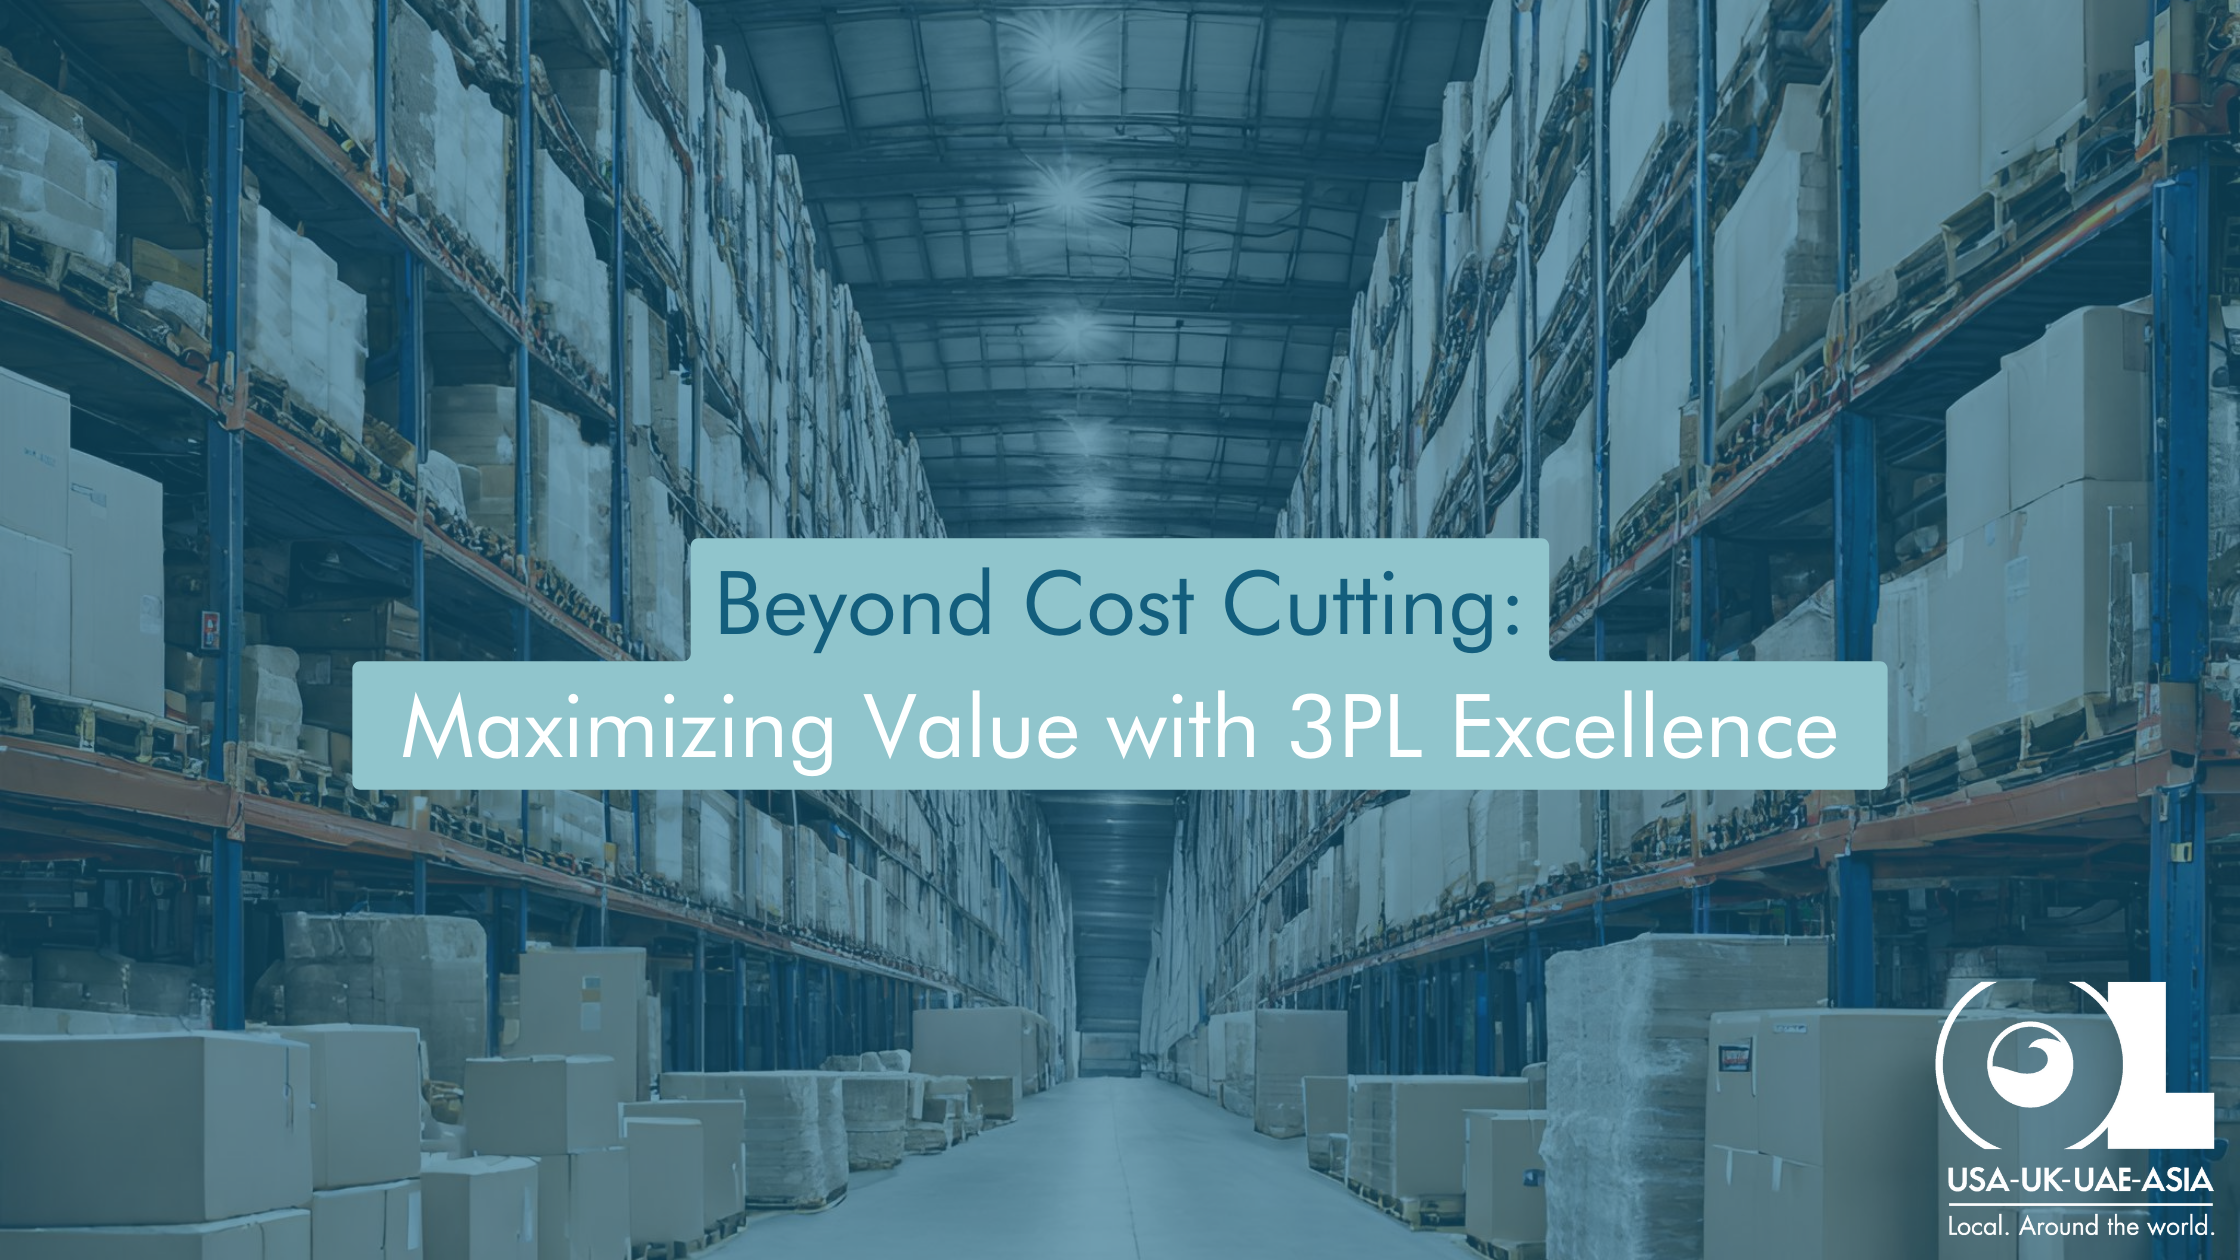 Beyond-Cost-Cutting-Maximizing-Value-with-3PL-Excellence-OL-USA